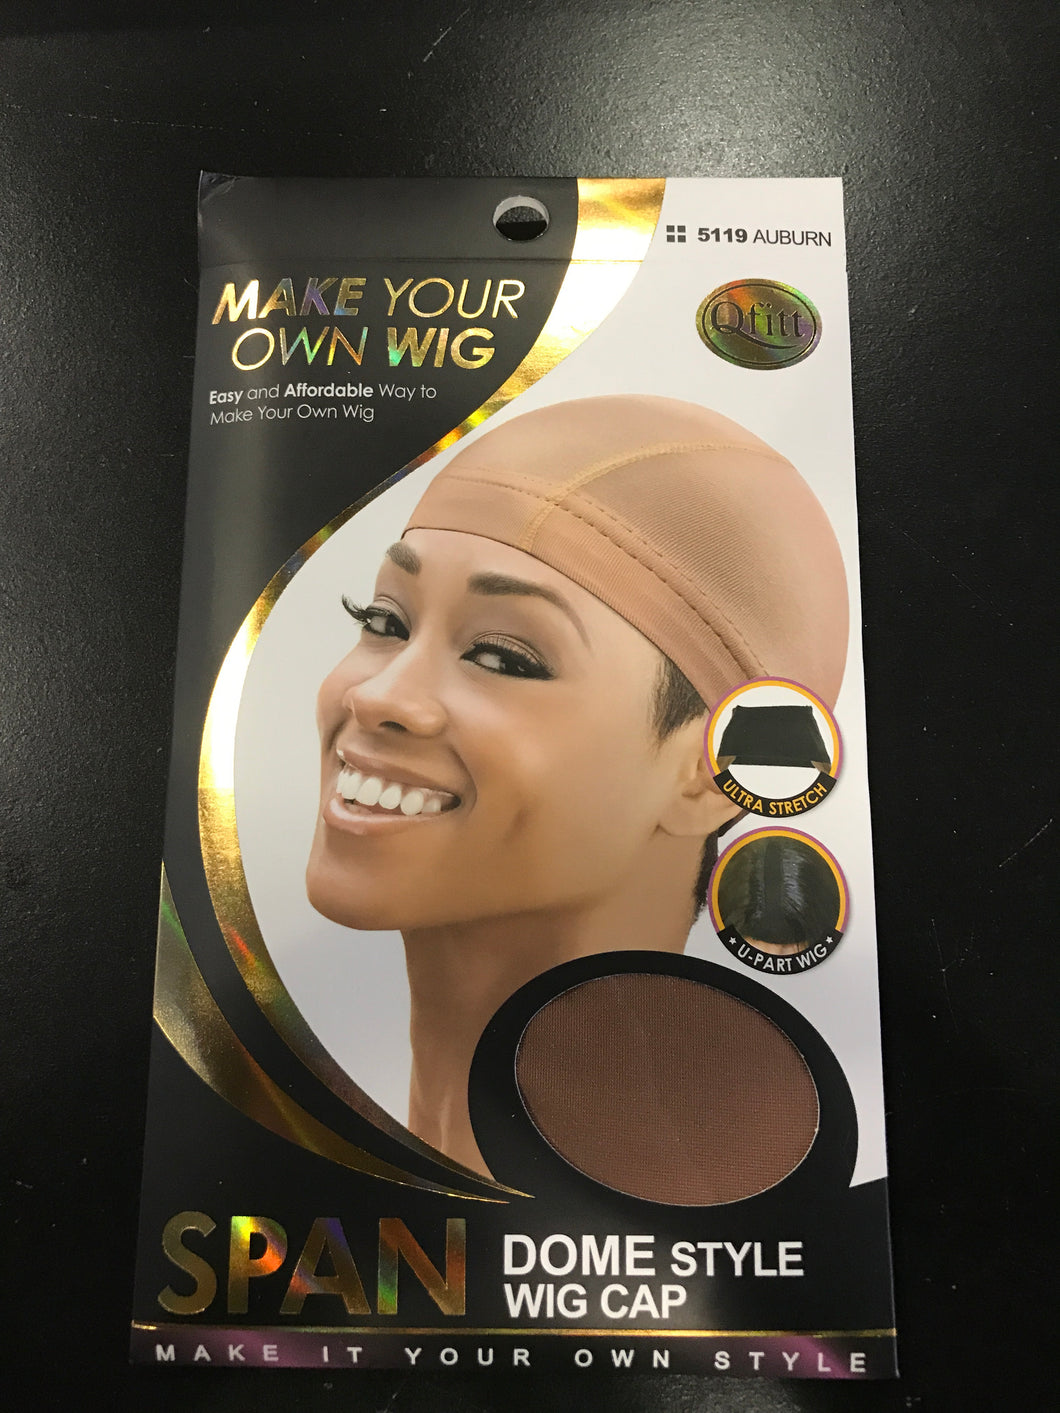 Qfitt make your own wig